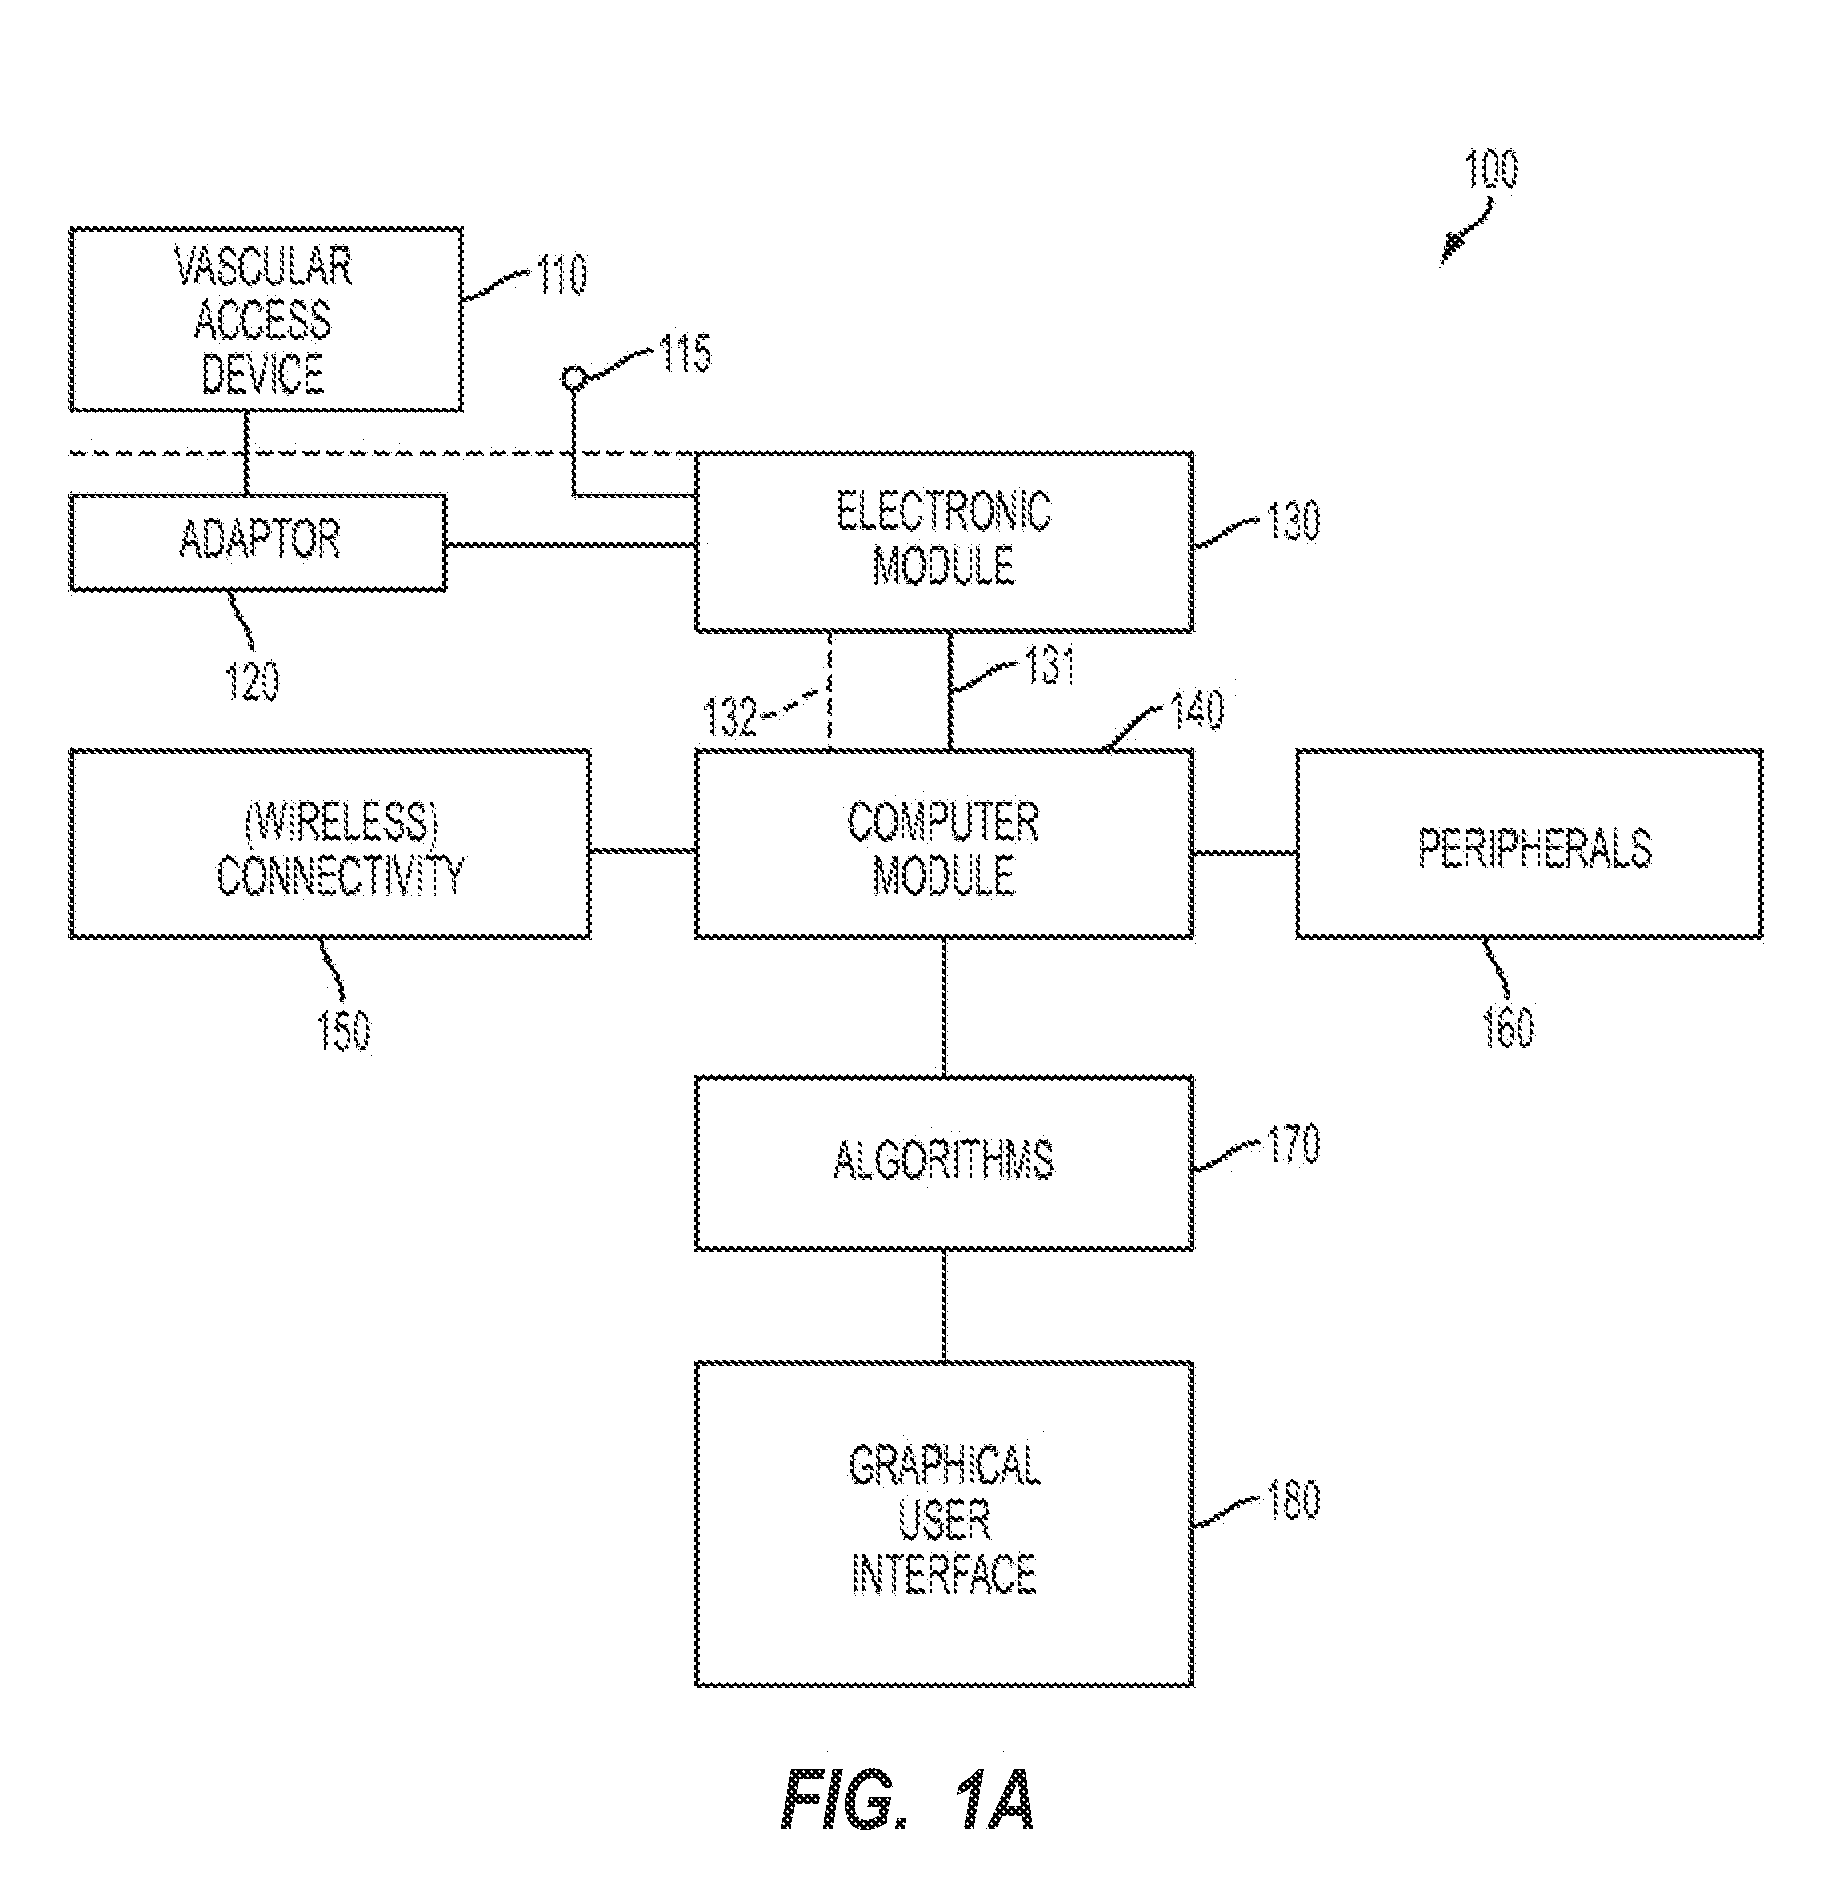 Apparatus and method for catheter navigation and tip location